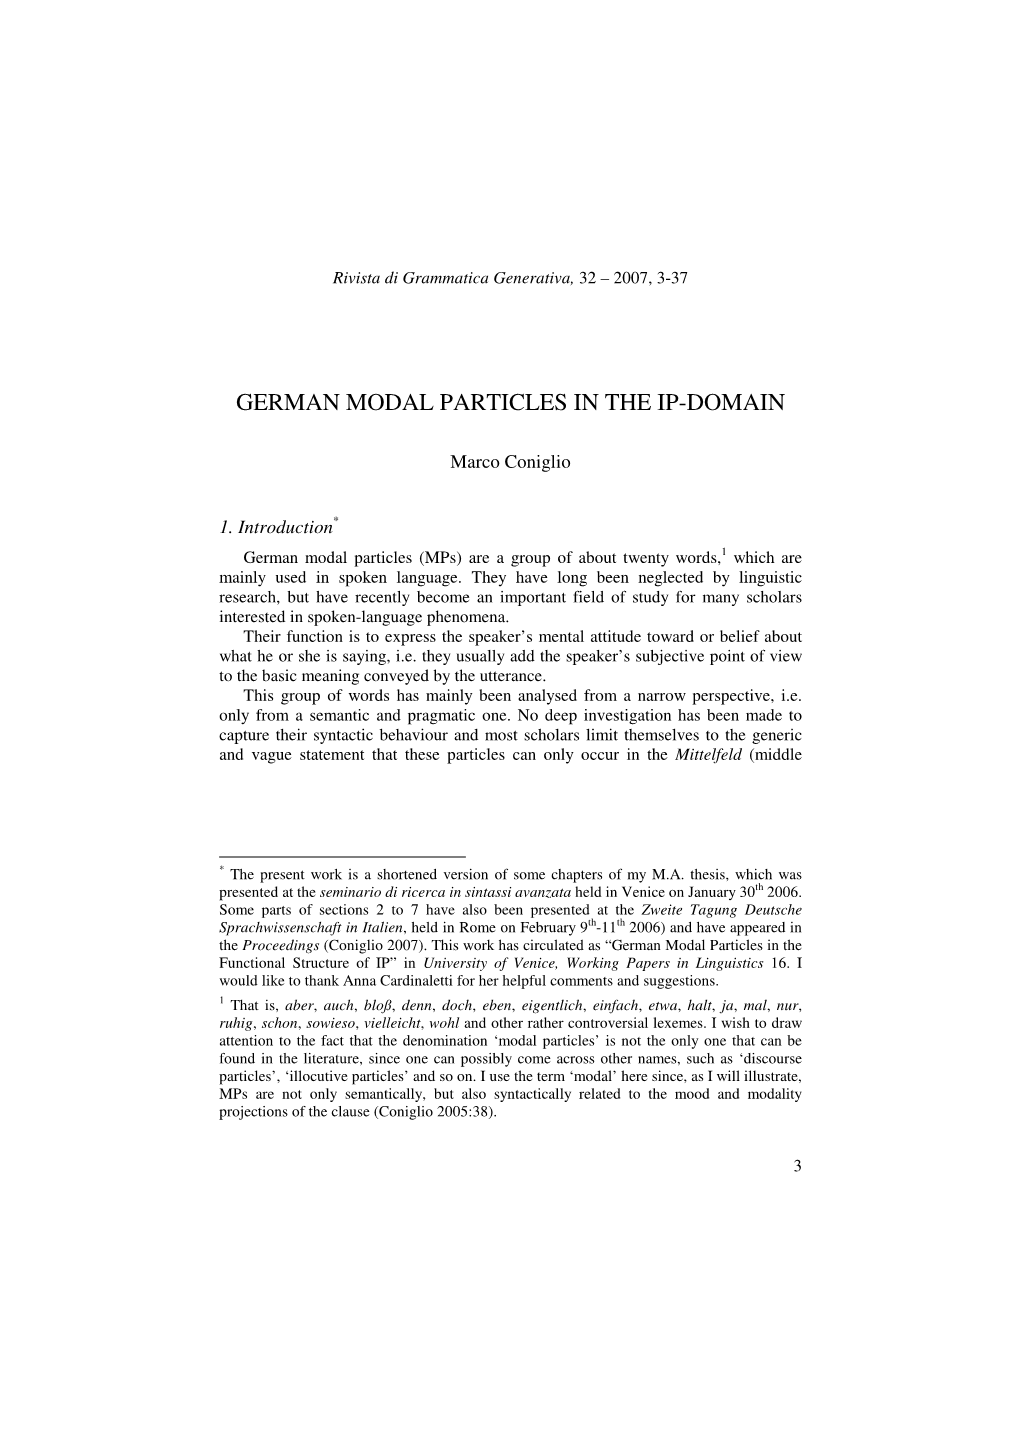 German Modal Particles in the Ip-Domain